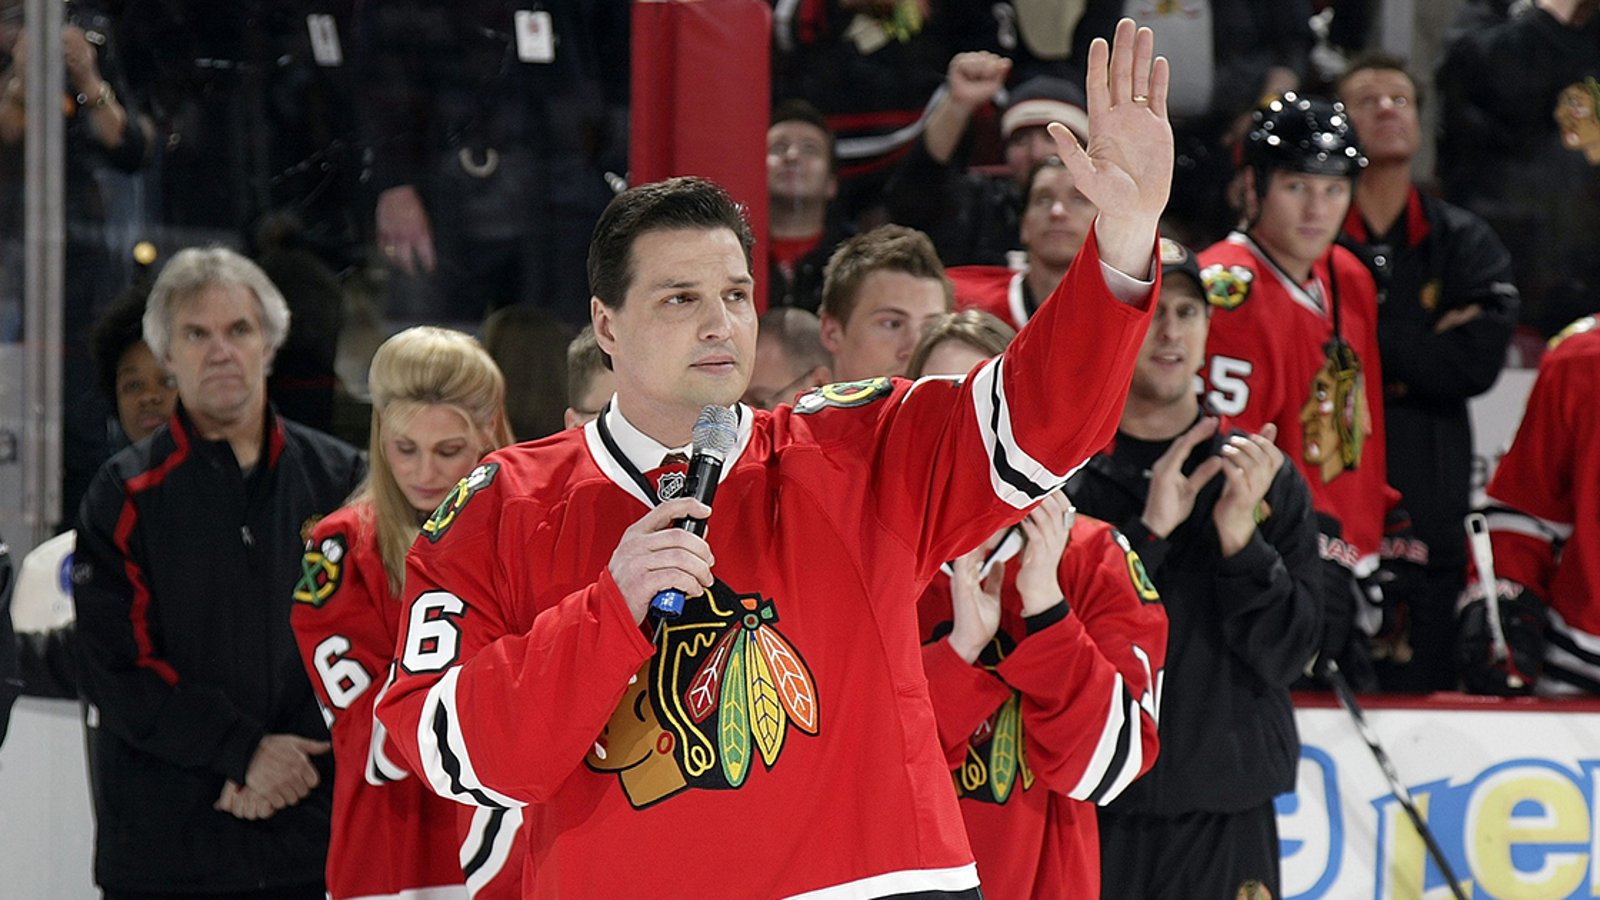 NBC analyst and cancer survivor Eddie Olczyk signs with the Blackhawks for “One More Shift”